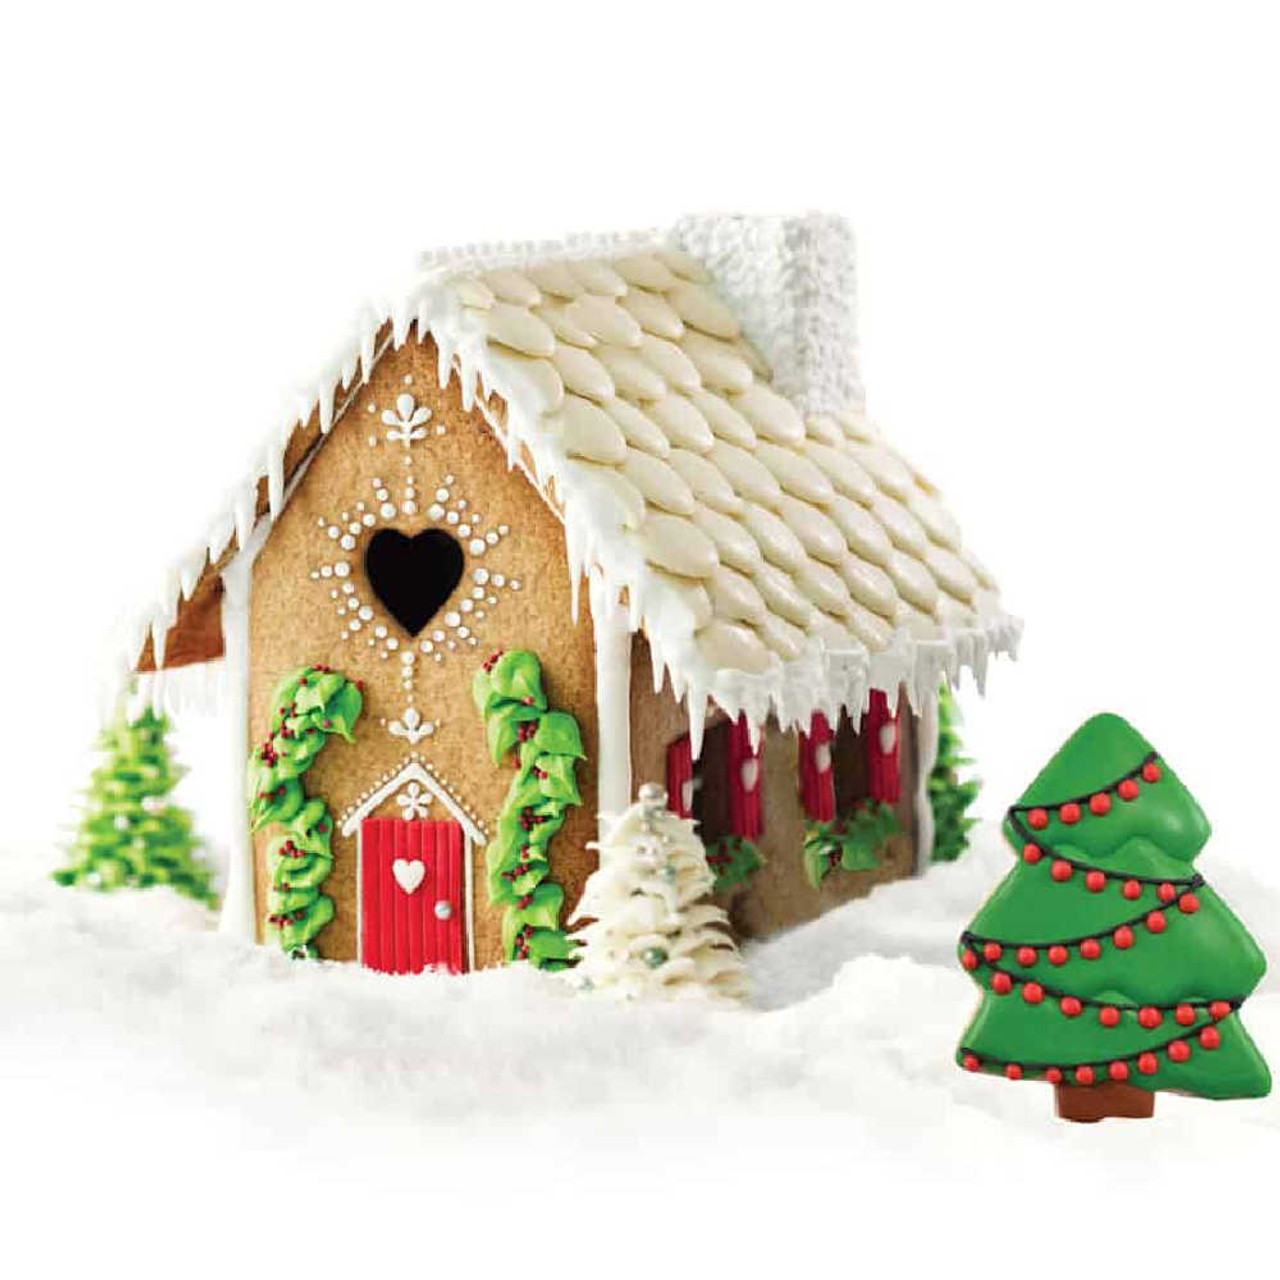 https://cdn11.bigcommerce.com/s-hccytny0od/images/stencil/1280x1280/products/5055/21450/Gingerbread_House_Bake_Set_2__67014.1664903775.jpg?c=2?imbypass=on